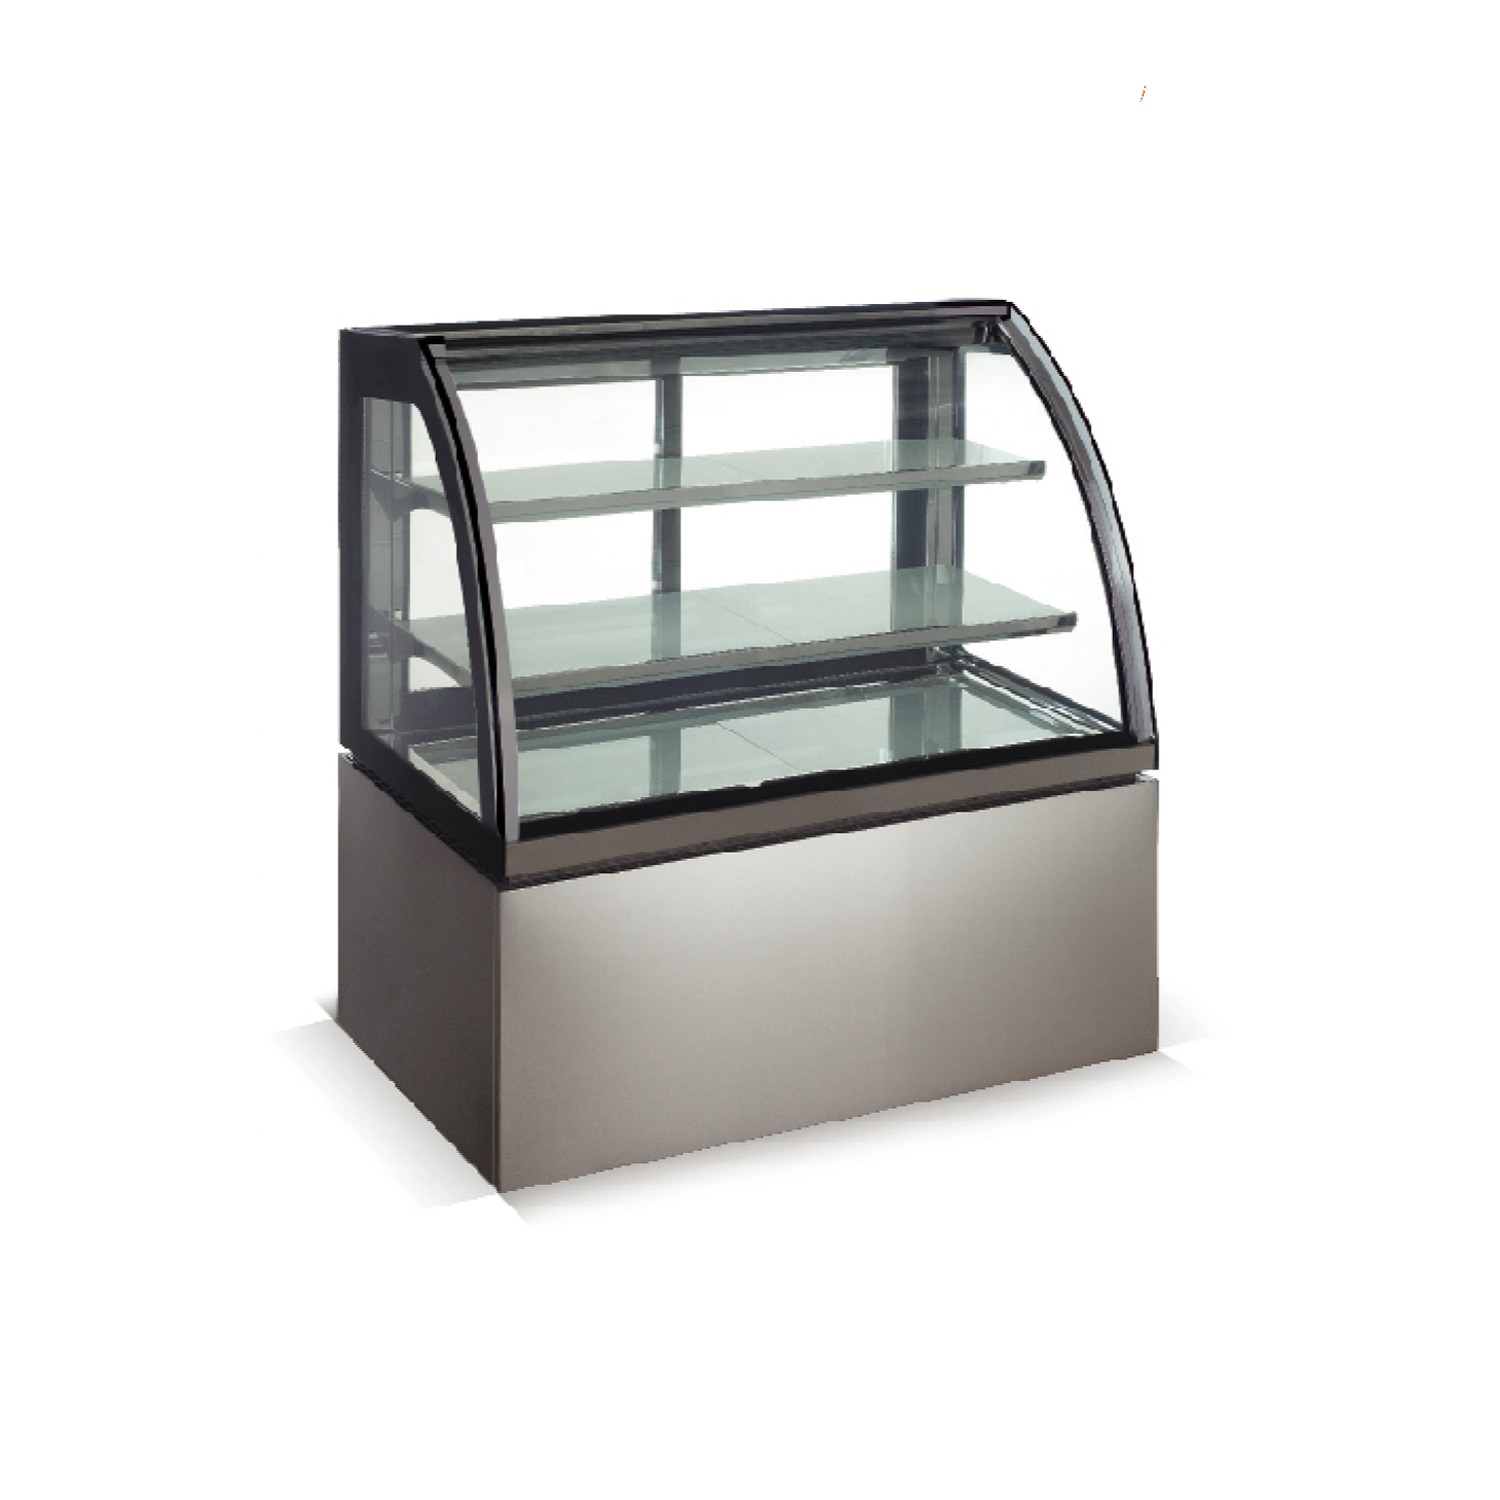 Refrigerated Display Case Mian View 